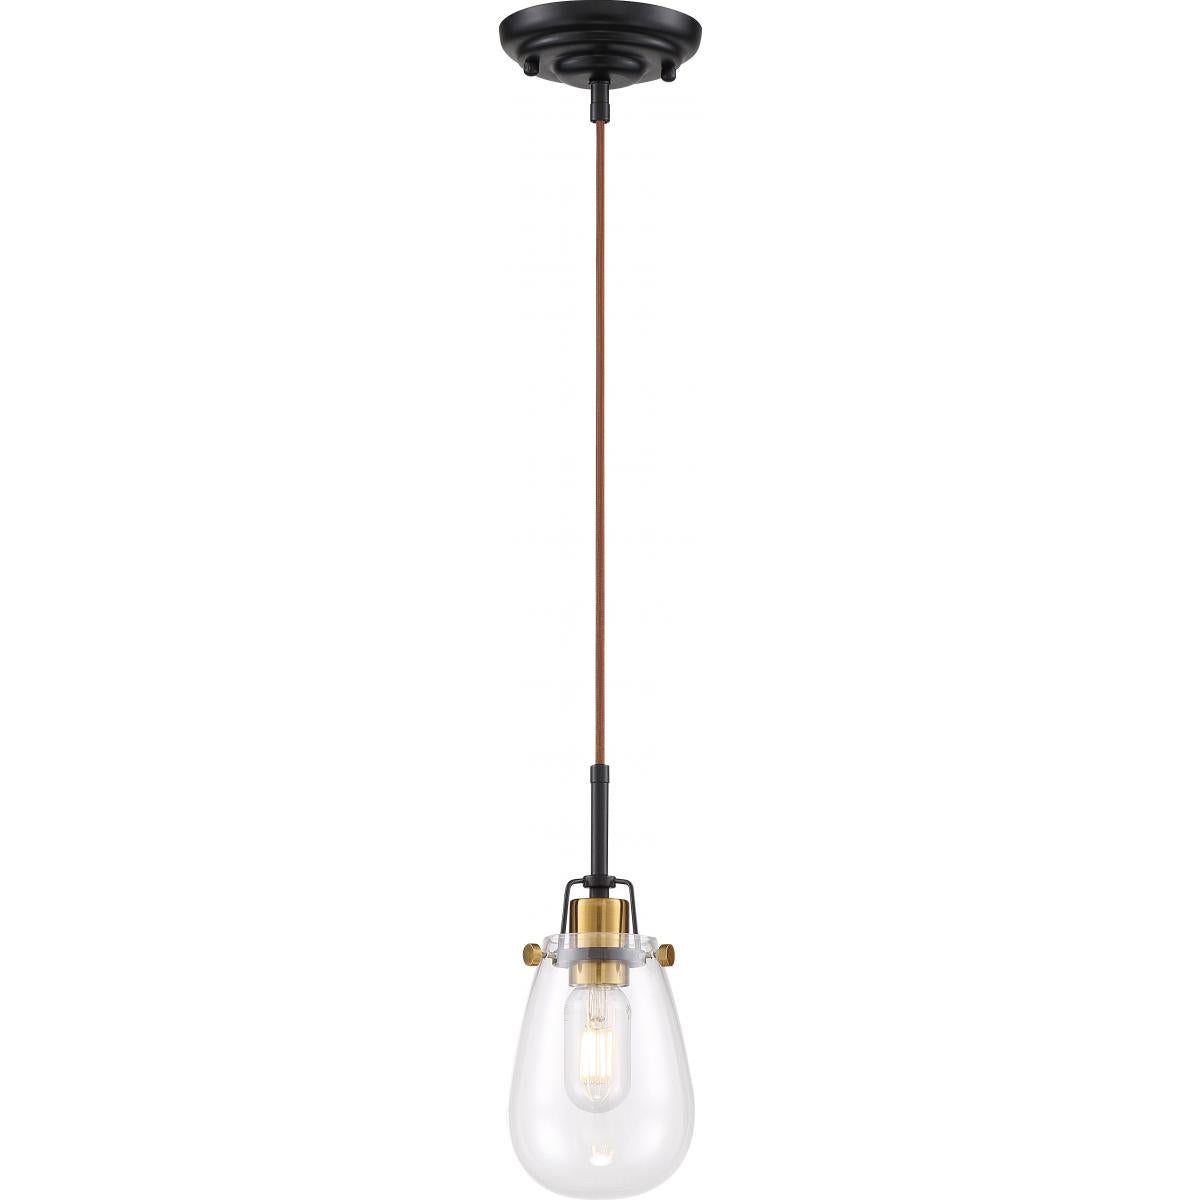 Toleo- 1 Light Mini Pendant with Clear Glass - Black Finish & Vintage Brass Accents